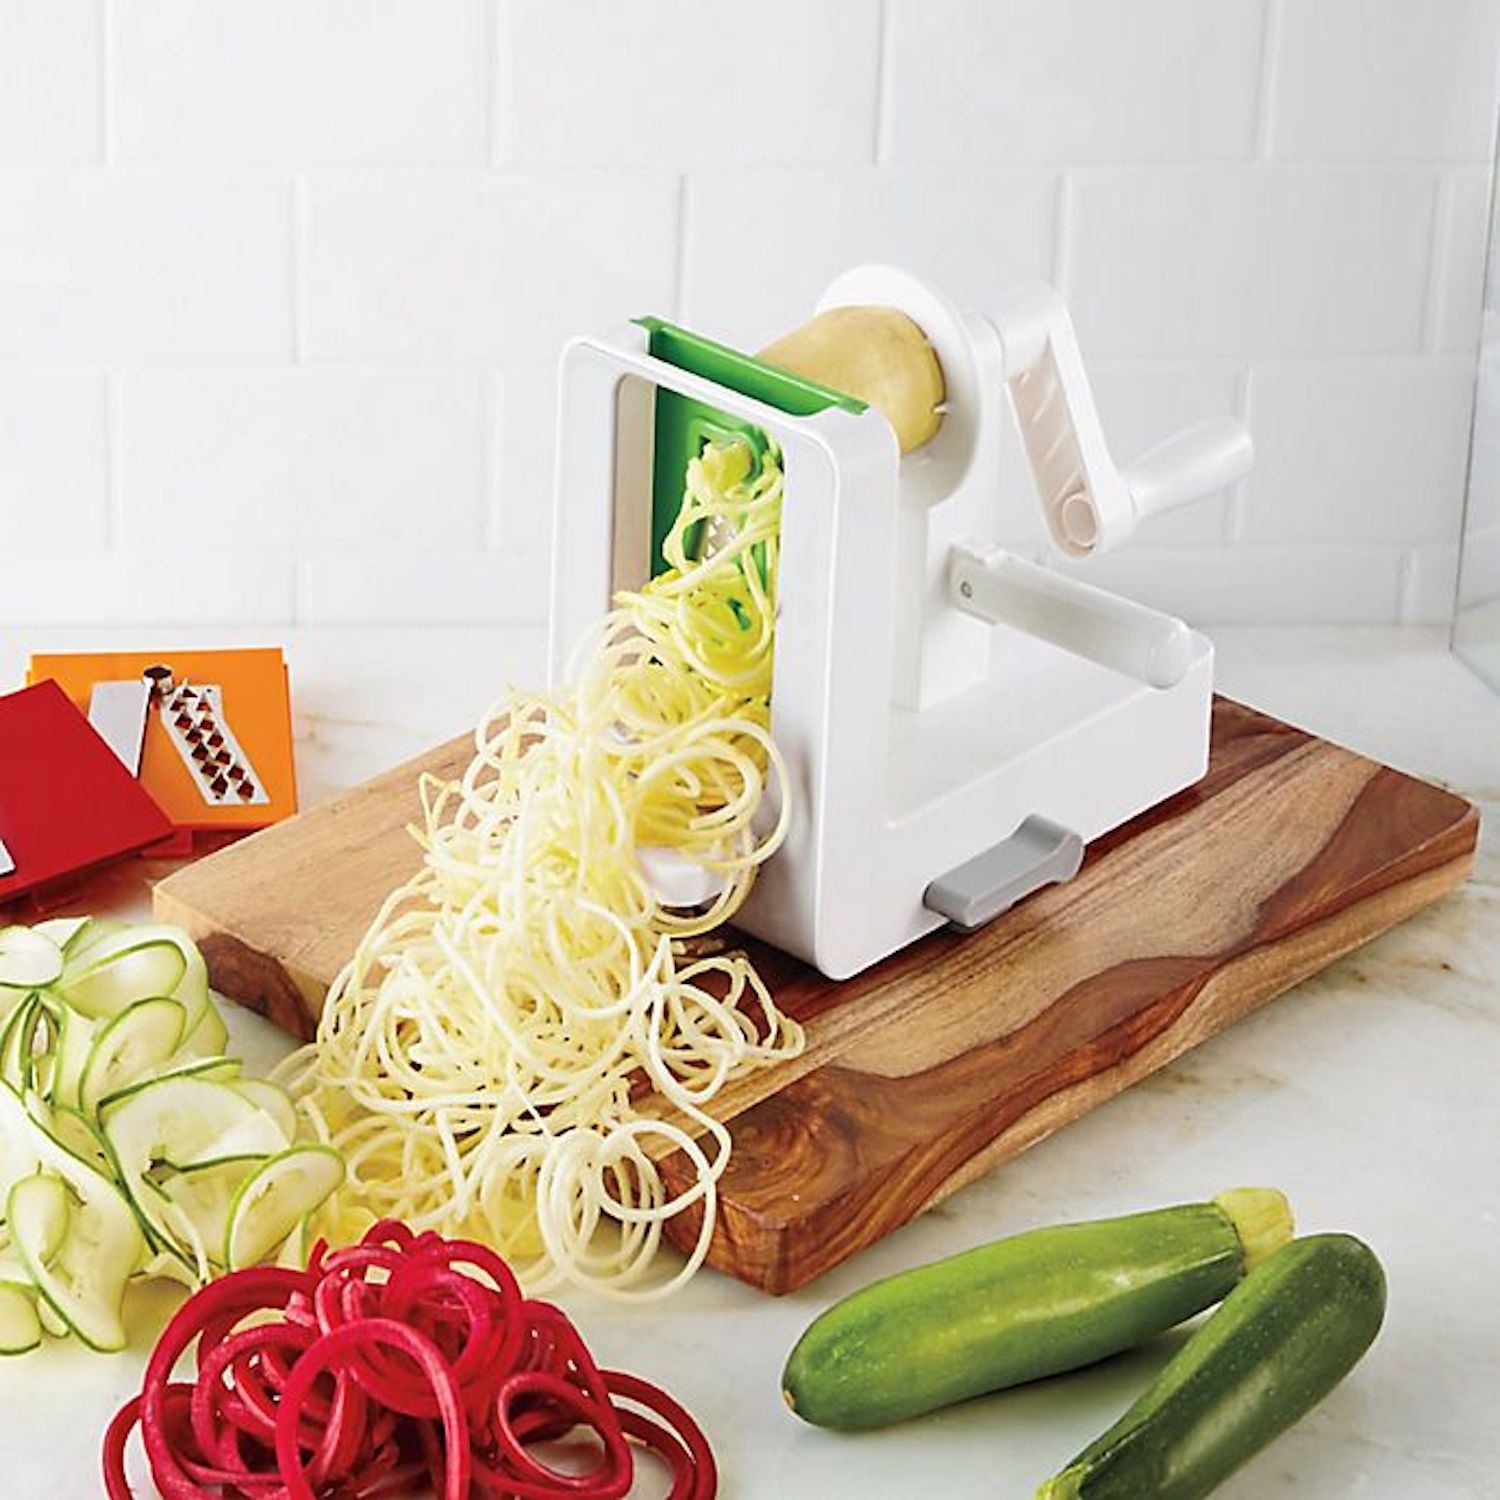 Other Food Preparation Tools - Bed Bath & Beyond